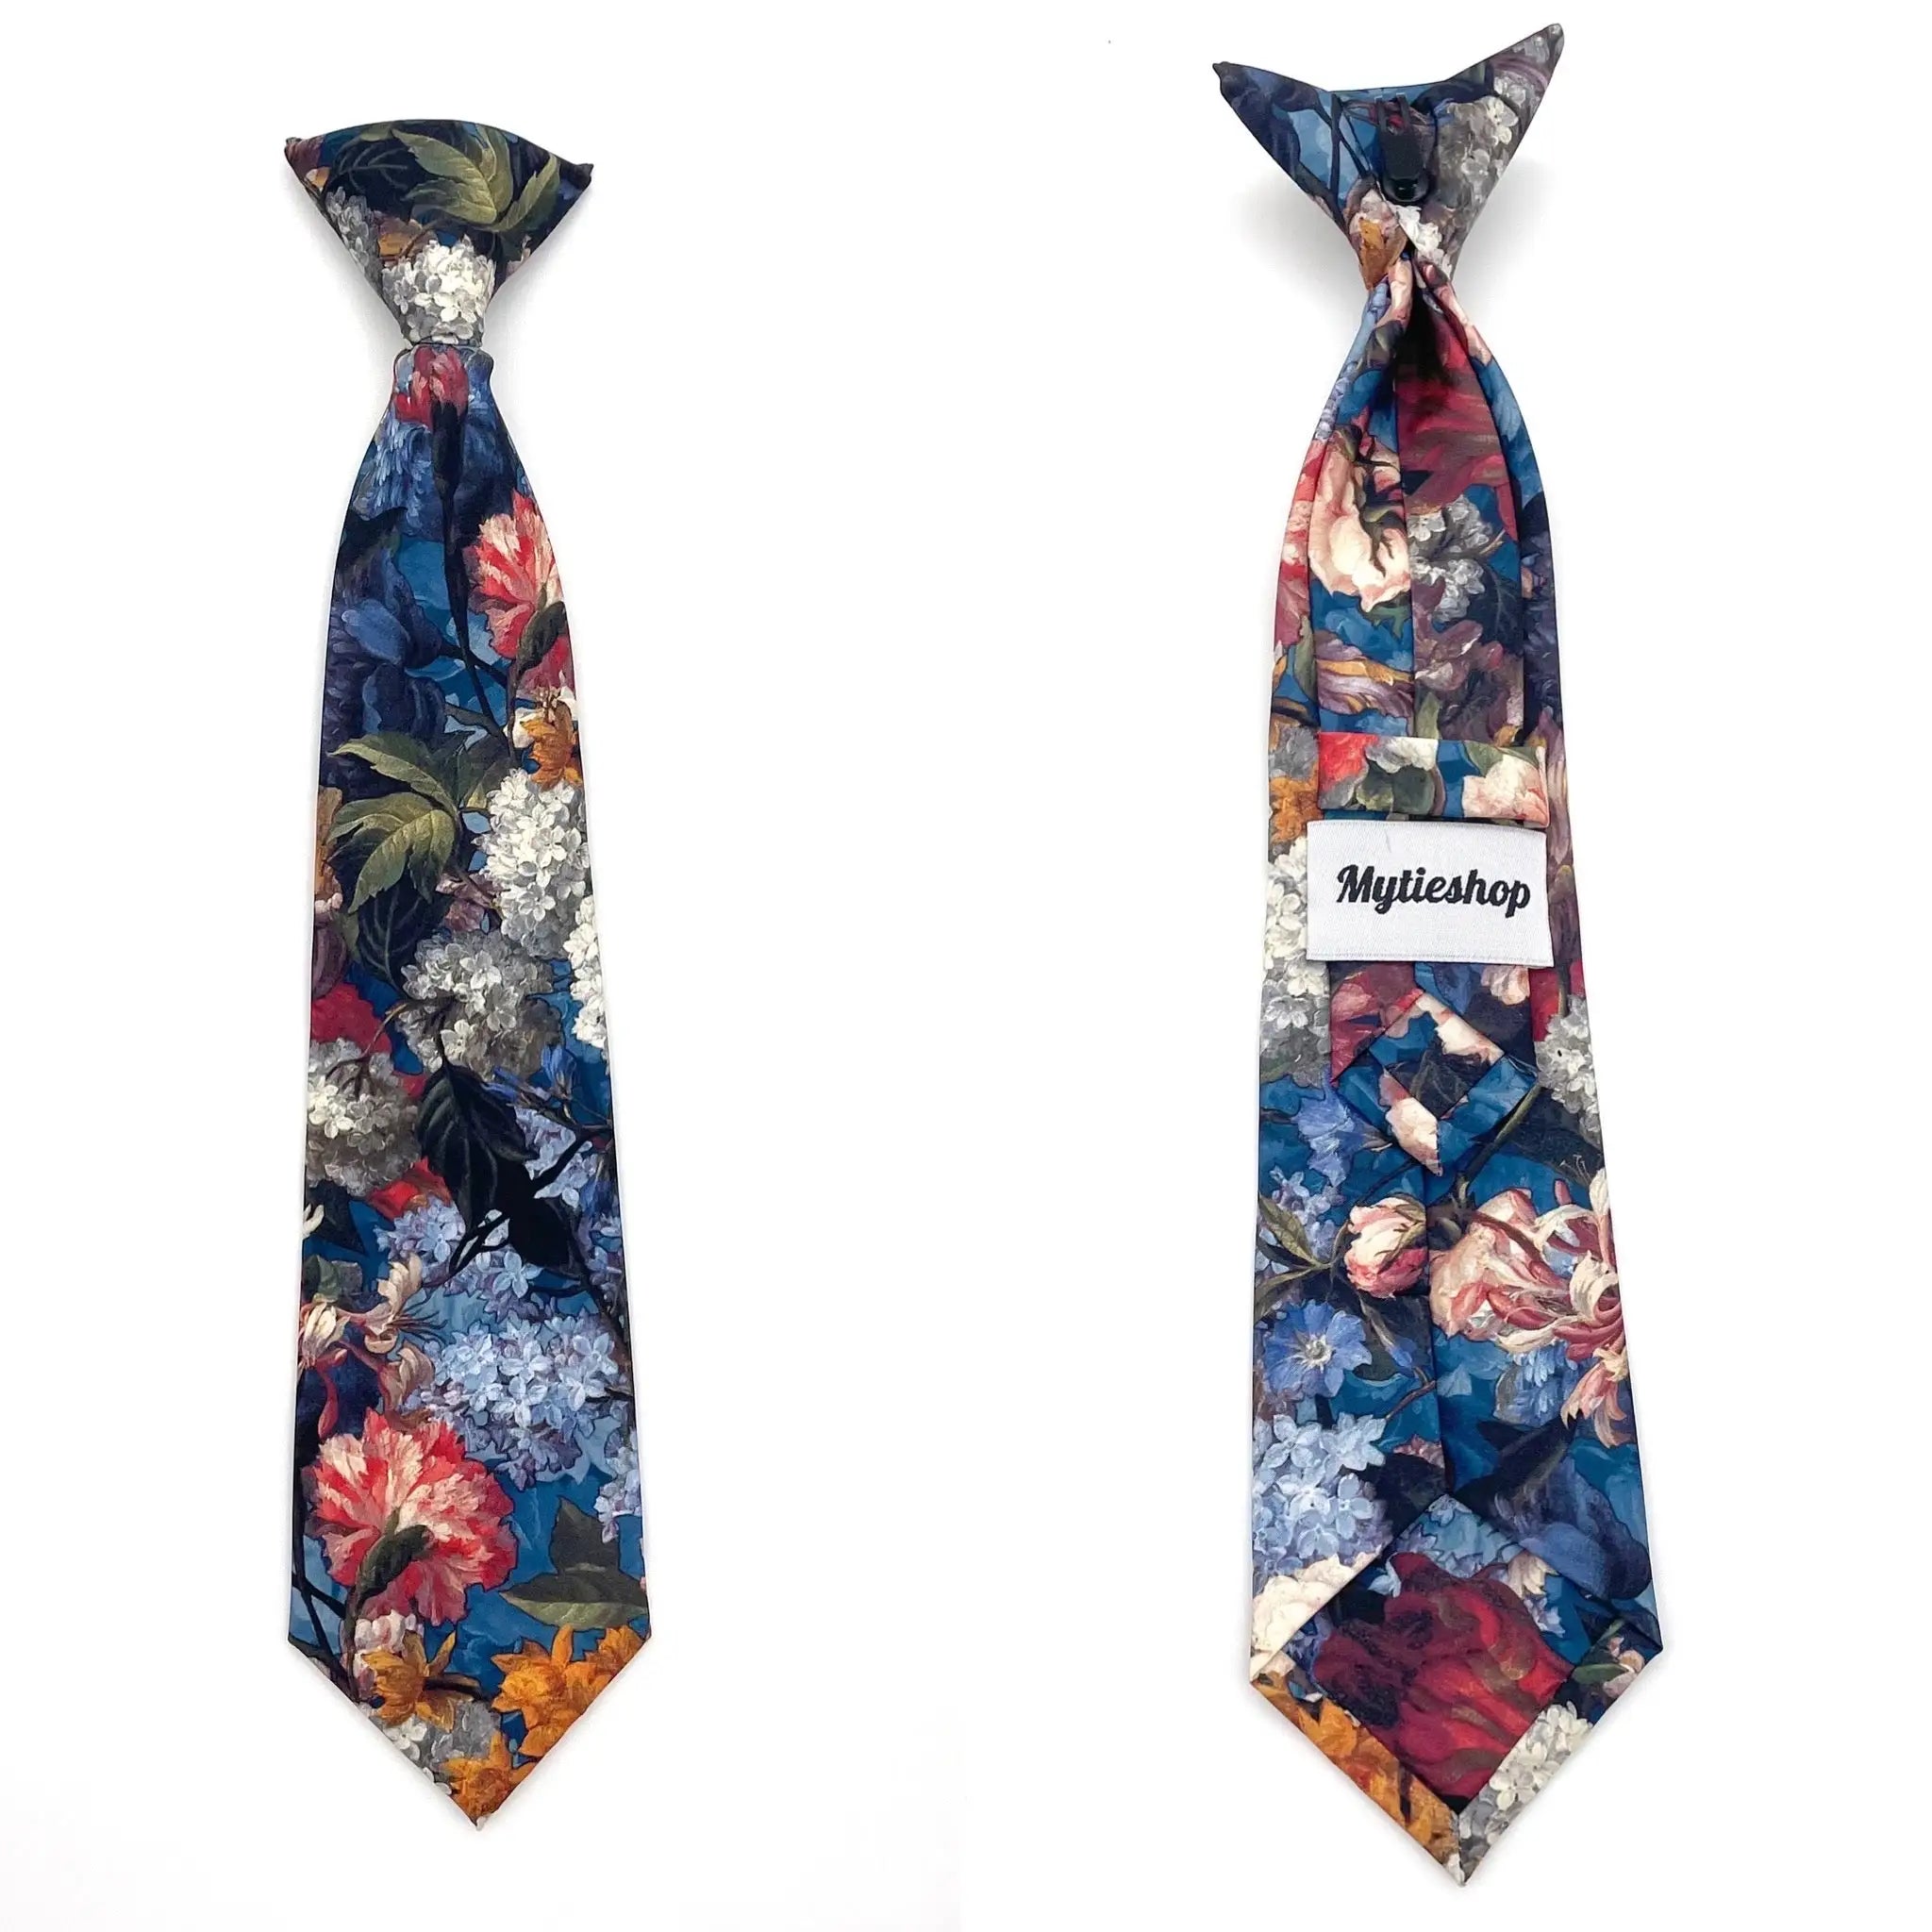 Blue Floral Boys Floral Clip On Tie 2.36 MYTIESHOP - HAMILTON-Blue Floral Boys Floral Clip On Tie - Clip on ties for kids Material: Cotton Approx Size: Color: Blue Max width: 6.5 cm / 2.4 inches 9-24 months 26 CM2-5 years 31 CM9-11 Years 43 CM To infuse a vibrant touch into your little one's attire, consider incorporating the Hamilton Boys Floral Clip On Tie. This versatile accessory is an excellent choice for various formal occasions, ranging from weddings to family gatherings. With its conveni